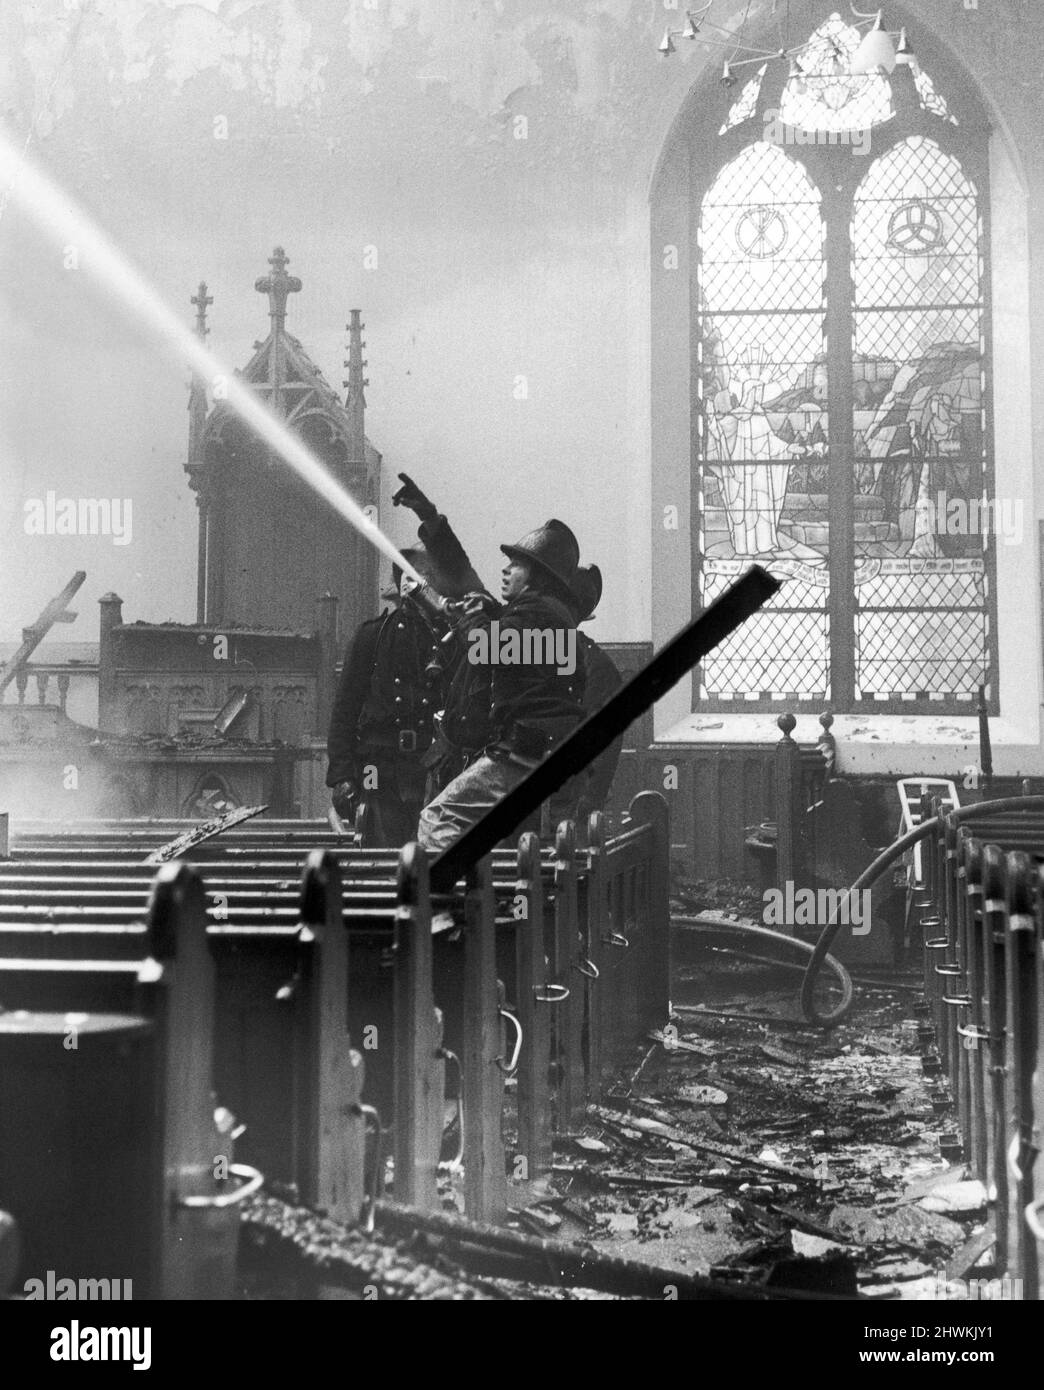 Fire at Morningside Baptist Church, December 1973. Firemen battle against the flames, amid silent pews overlooked by stained glass window. An eectrical fault in the gallery of the 100 year old church is thought to have started the blaze. Stock Photo